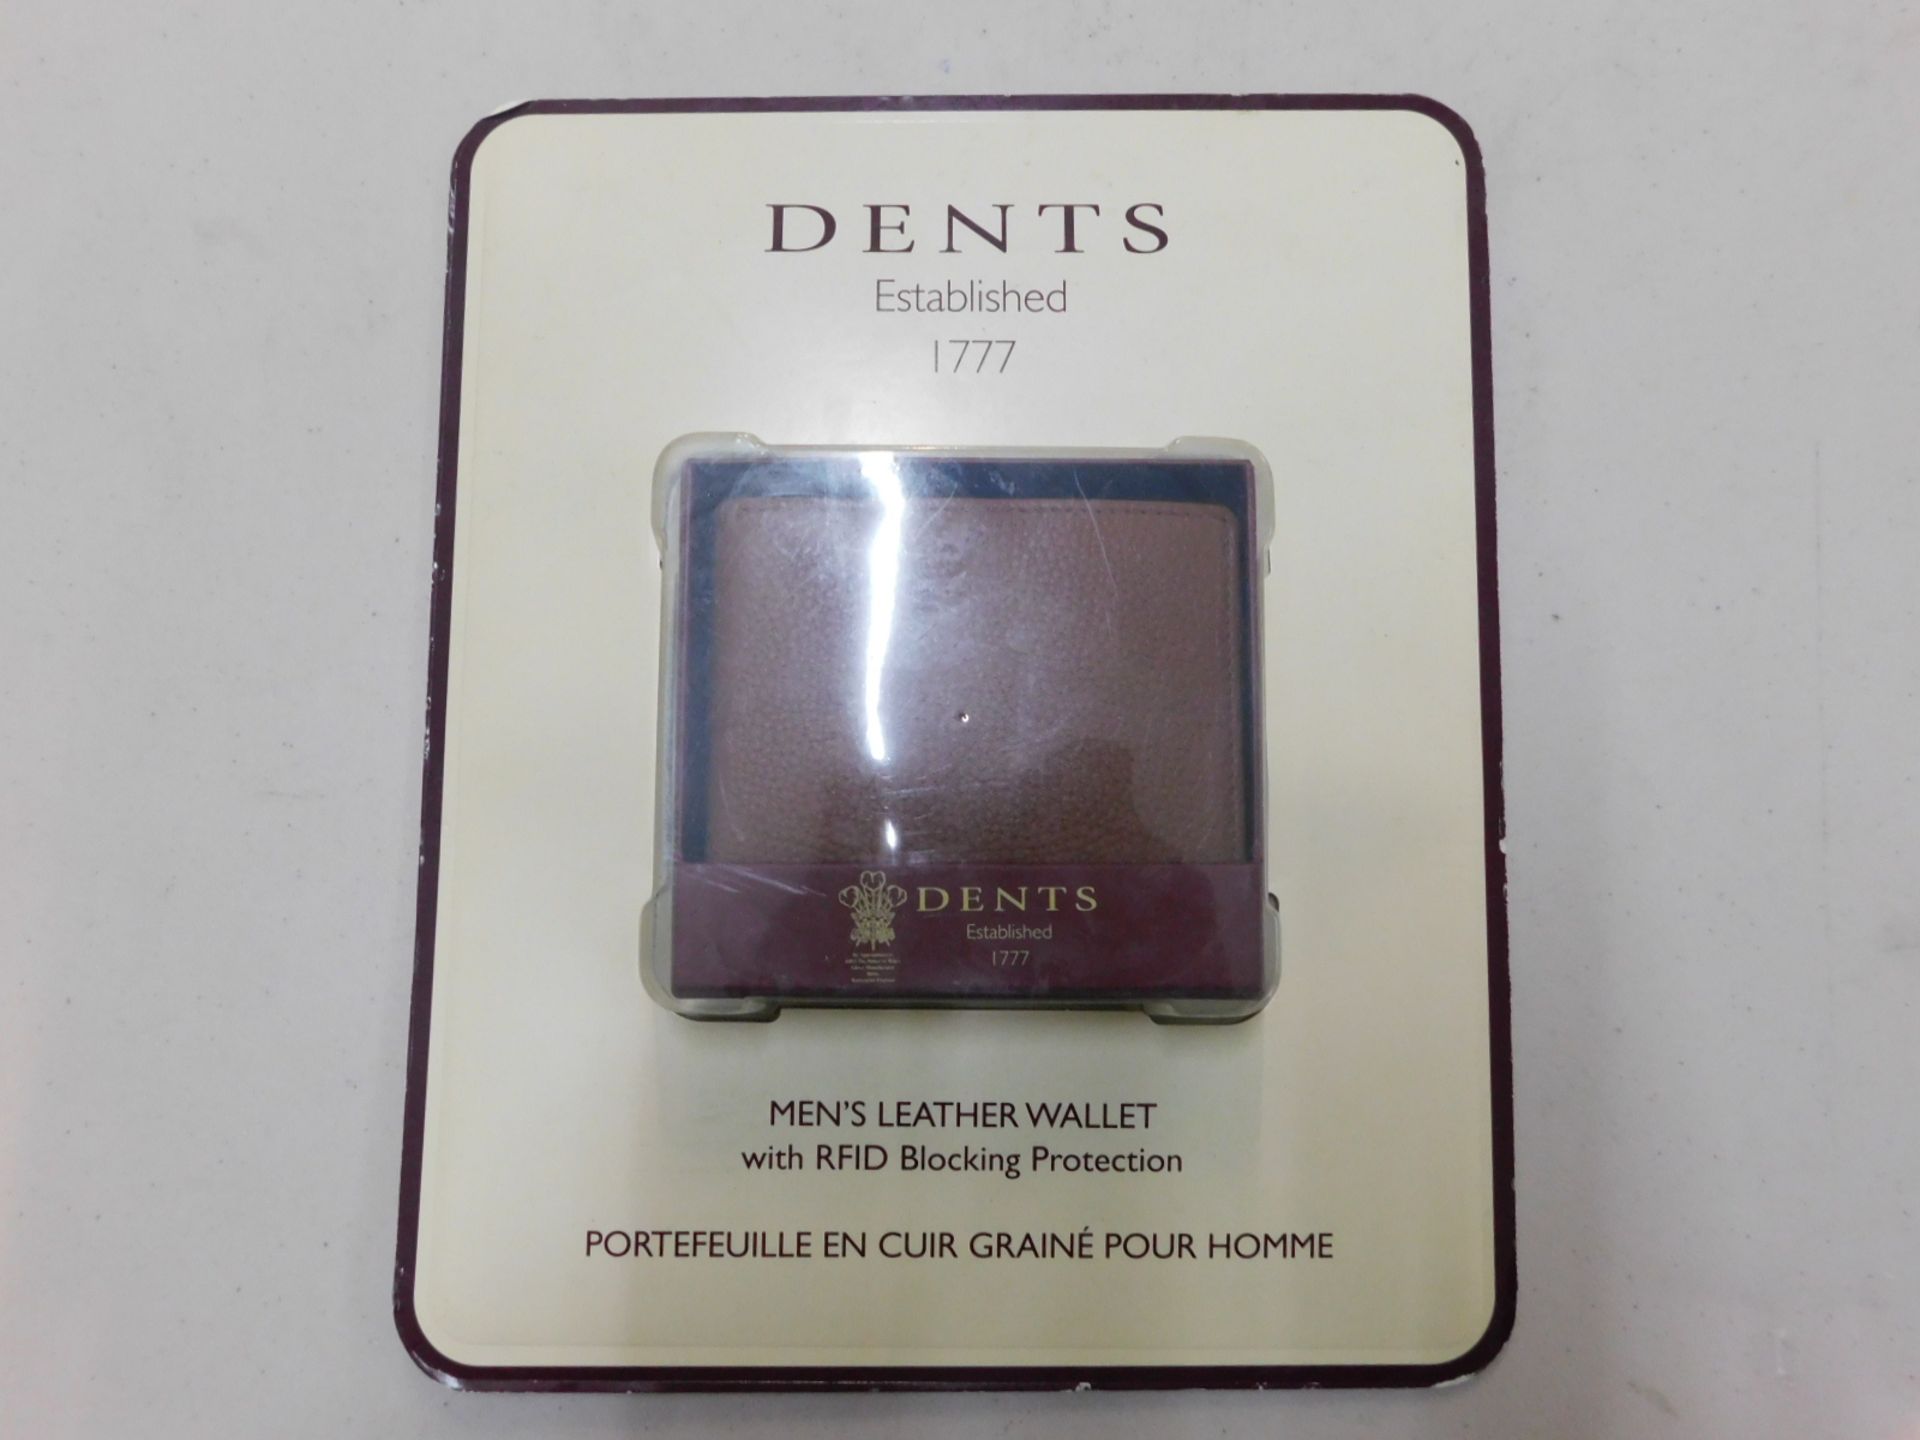 1 PACK OF DENTS MENS LEATHER WALLET WITH RFID BLOCKING PROTECTION RRP Â£29.9